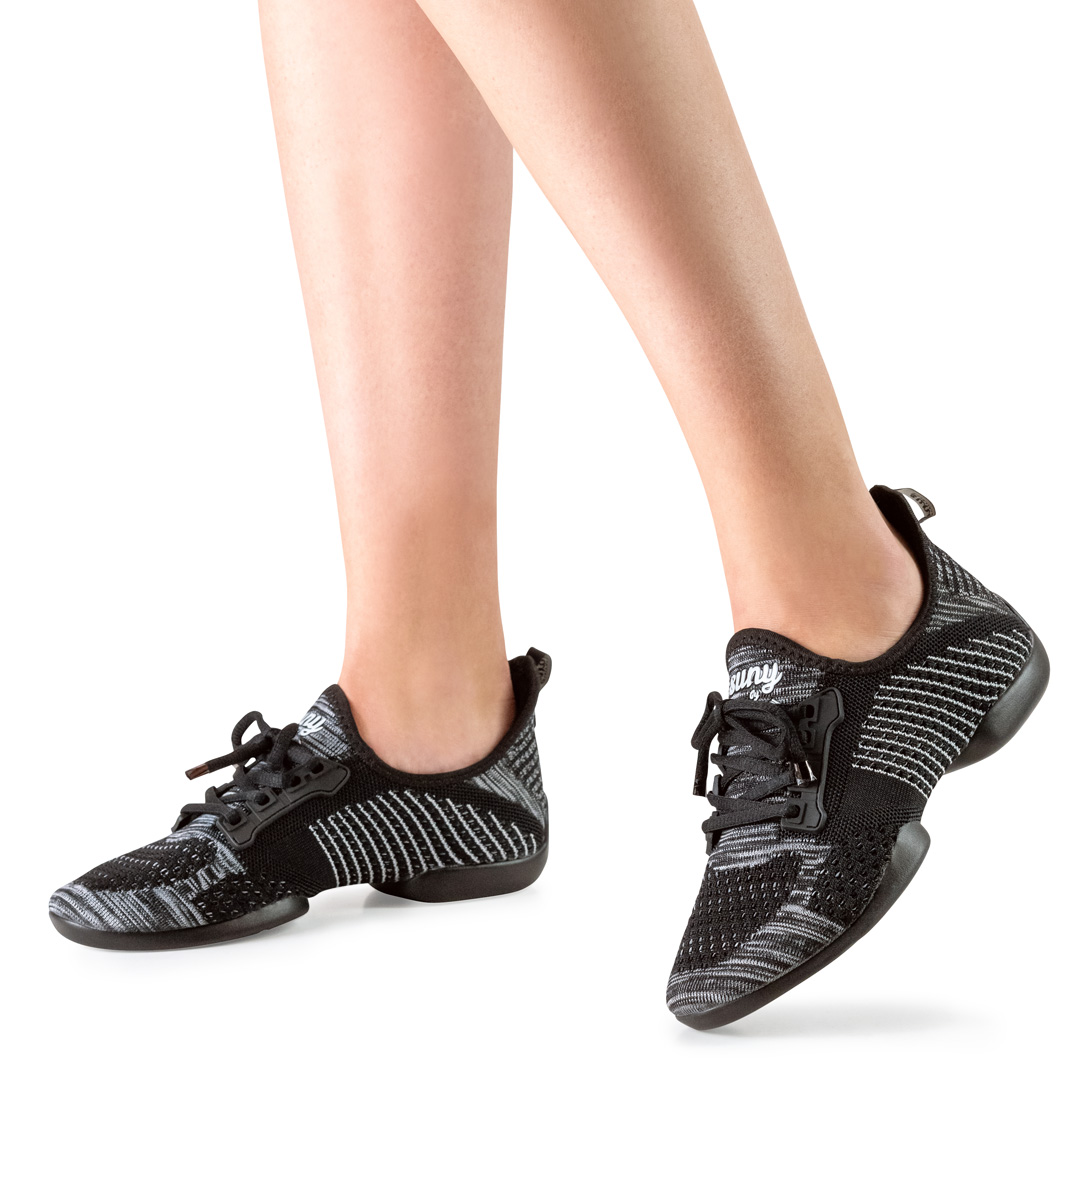 Women's dance sneakers for training with split sole by Suny